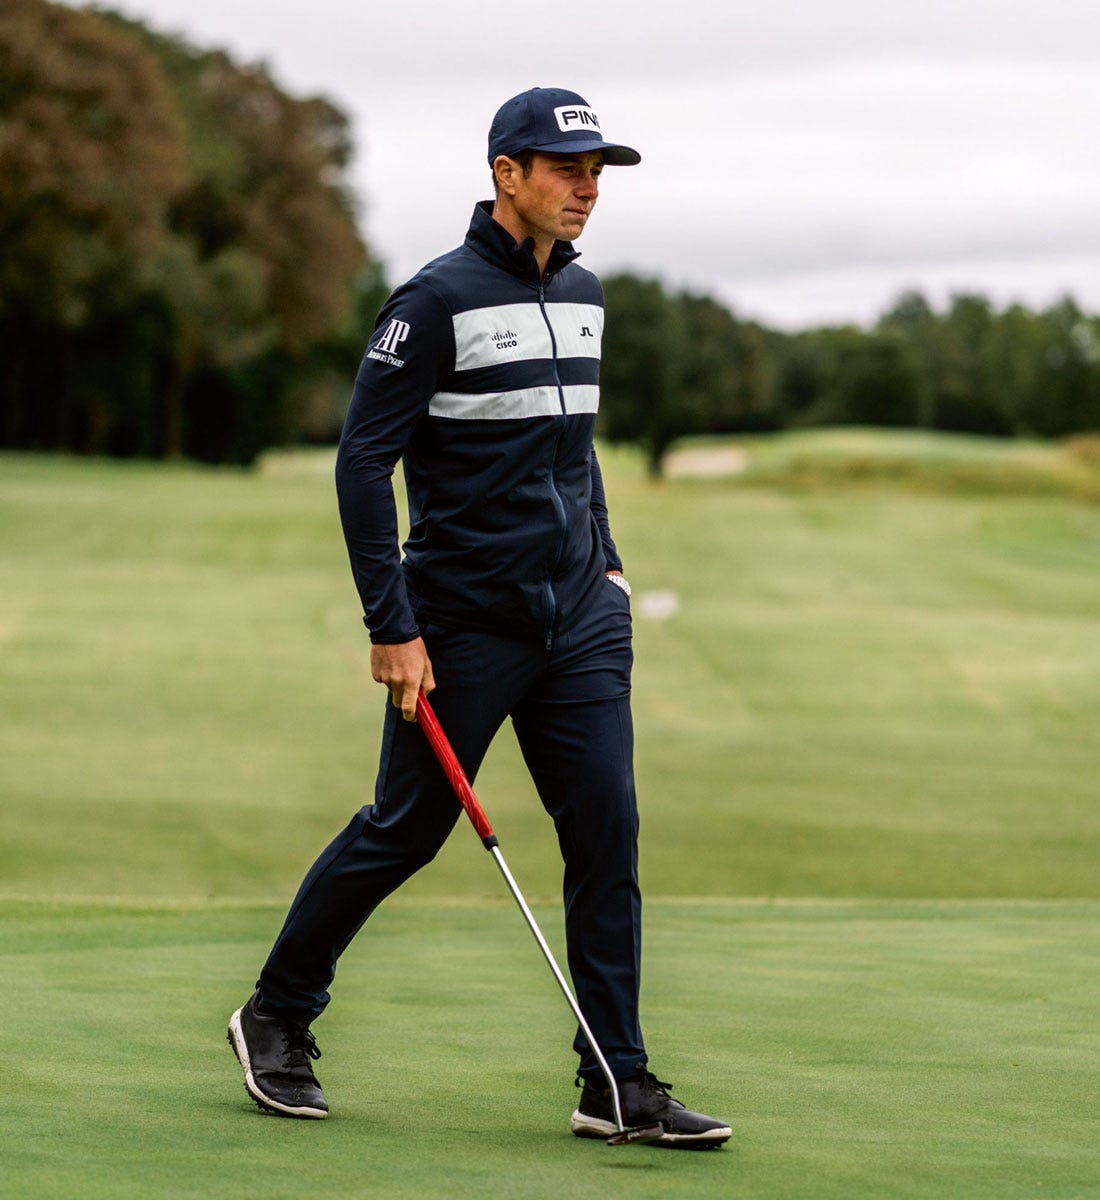 J.LINDEBERG WINTER CLOTHING: BEAT THE COLD IN STYLE ON AND OFF THE COURSE -  Exclusive Golf and Travel